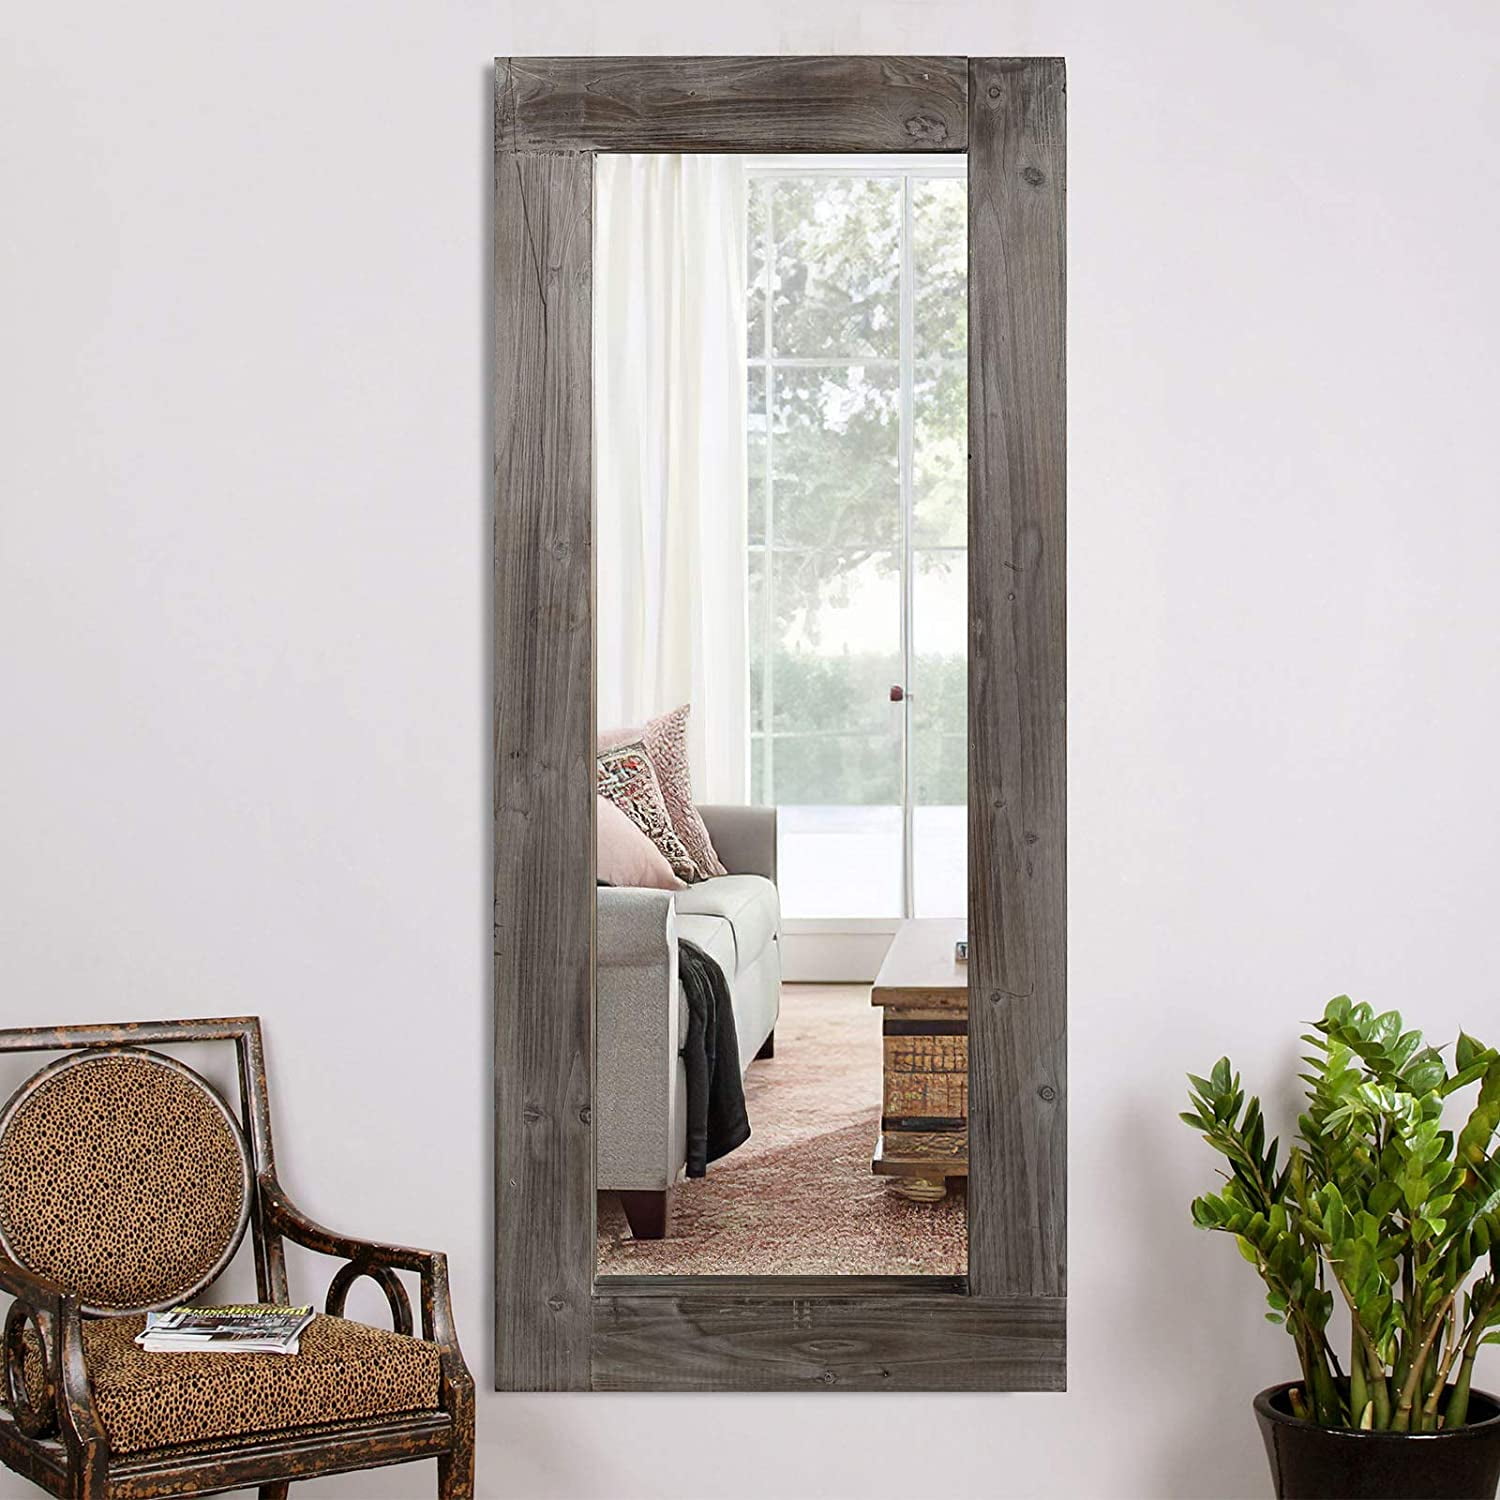 YCZX Floor Mirror Full Length Body Mirrors Large Leaning Wall Mounted